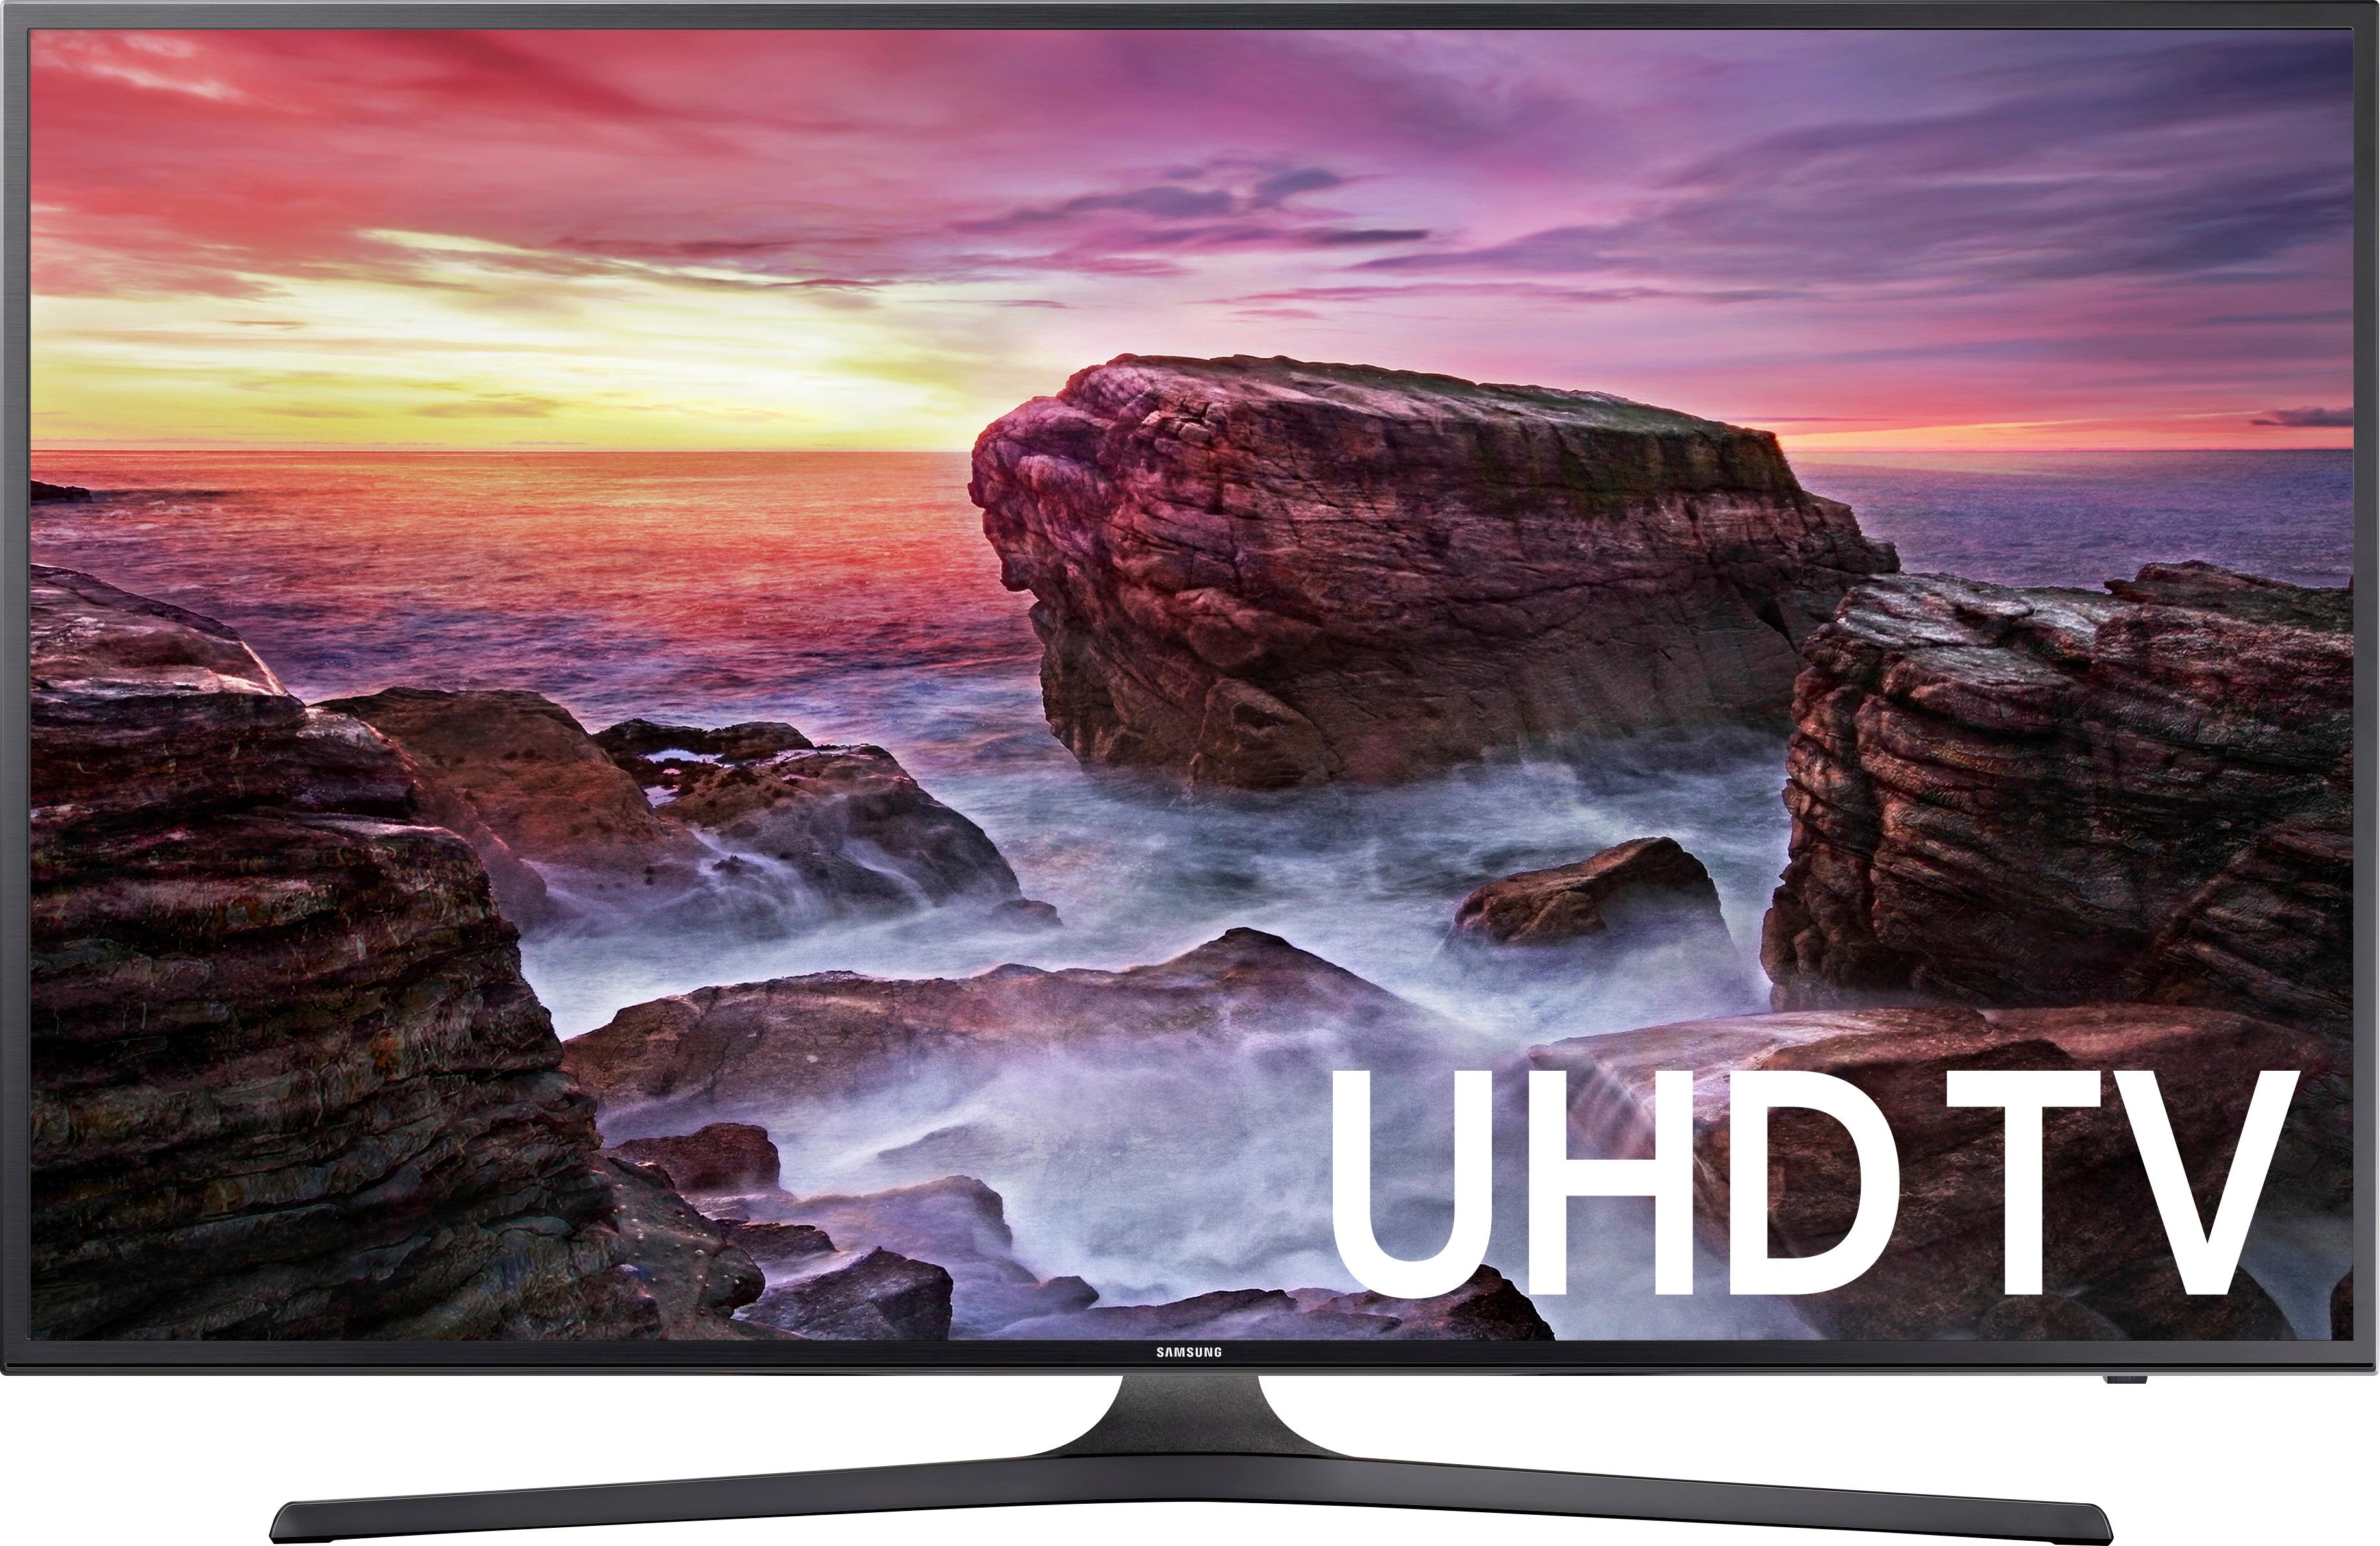 Questions and Answers Samsung 40" Class LED MU6290 Series 2160p Smart